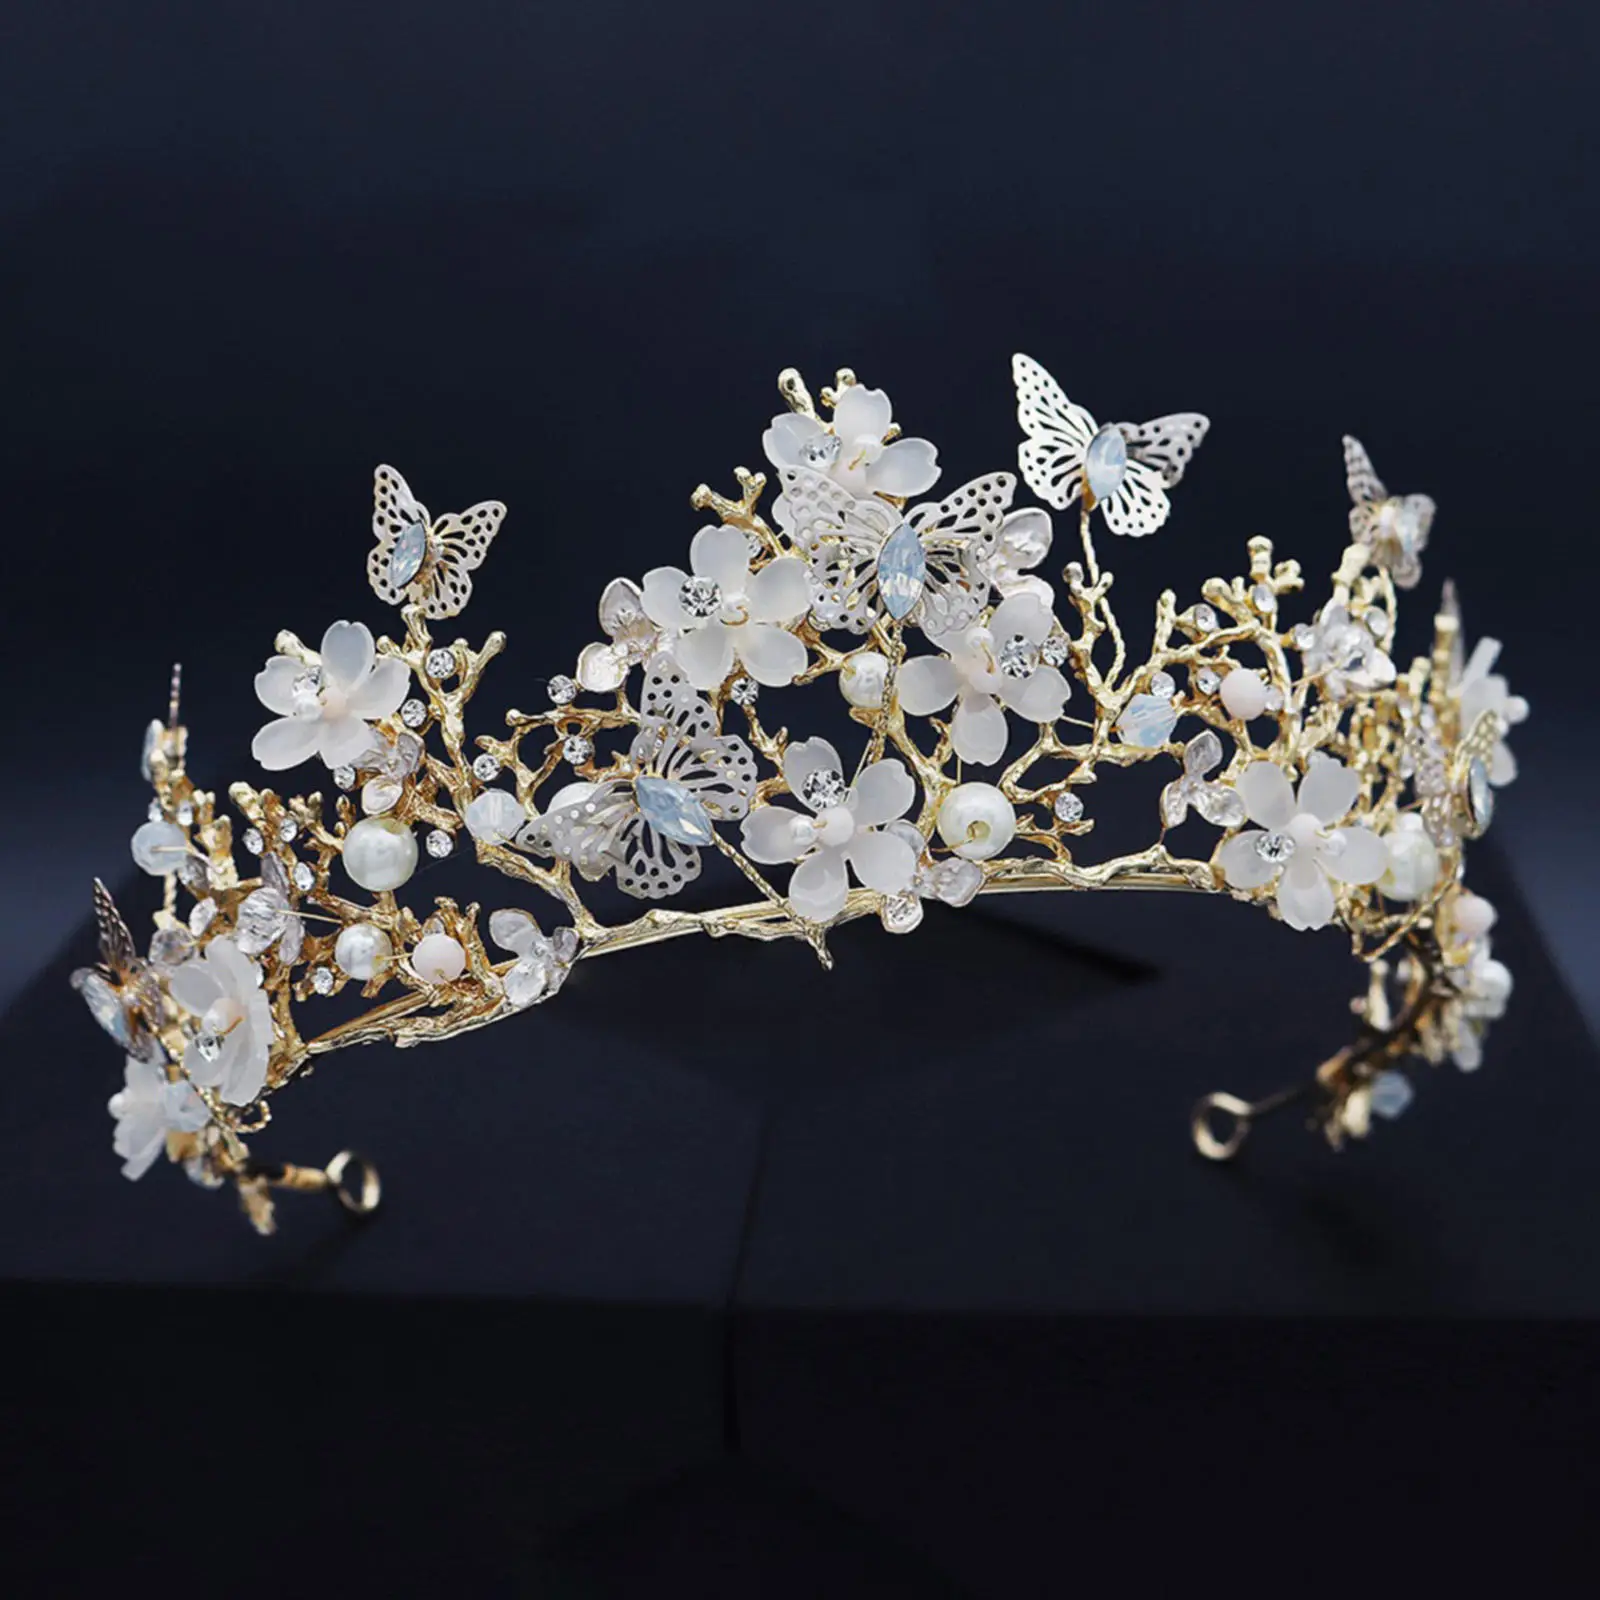 Lovely Vintage Princess Crown Headband Headbands Wedding Tiaras Costume Hair Accessories for Girls Woman Gifts